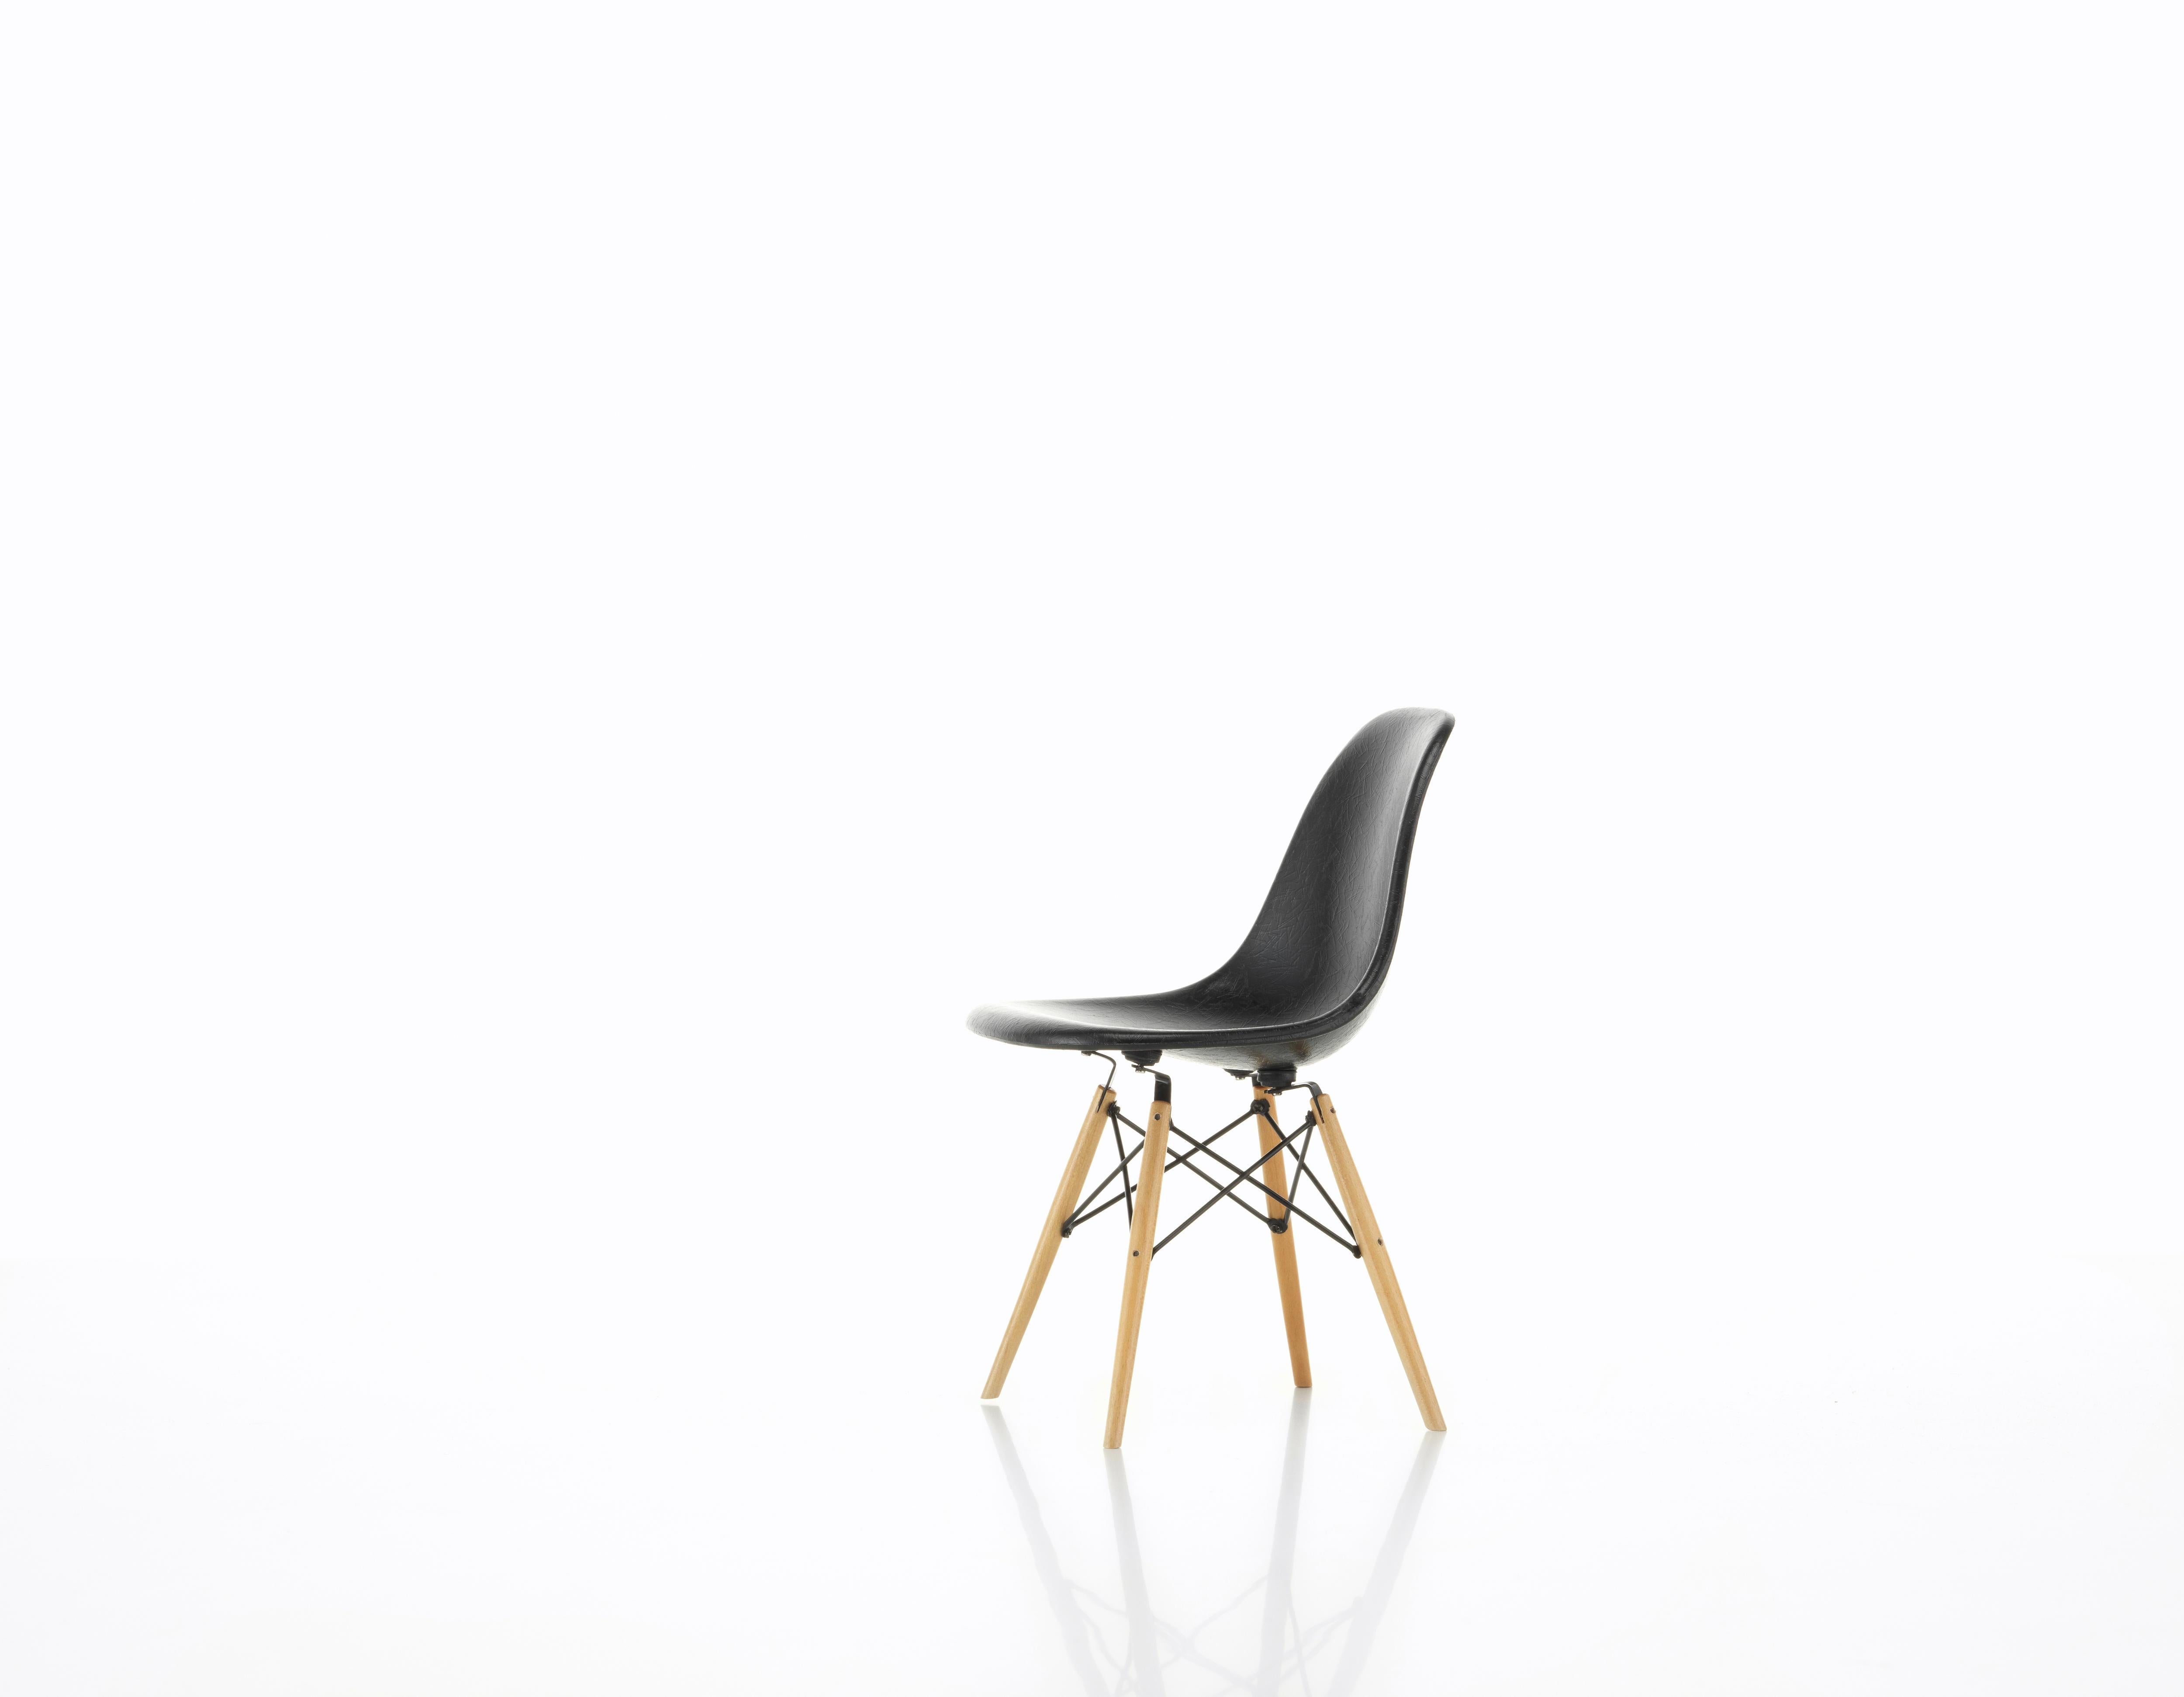 These items are currently only available in the United States.

The fiberglass chairs are rare examples of a satisfying synthesis of formal and technical innovation. For the first time in the history of design, Charles & Ray Eames utilized